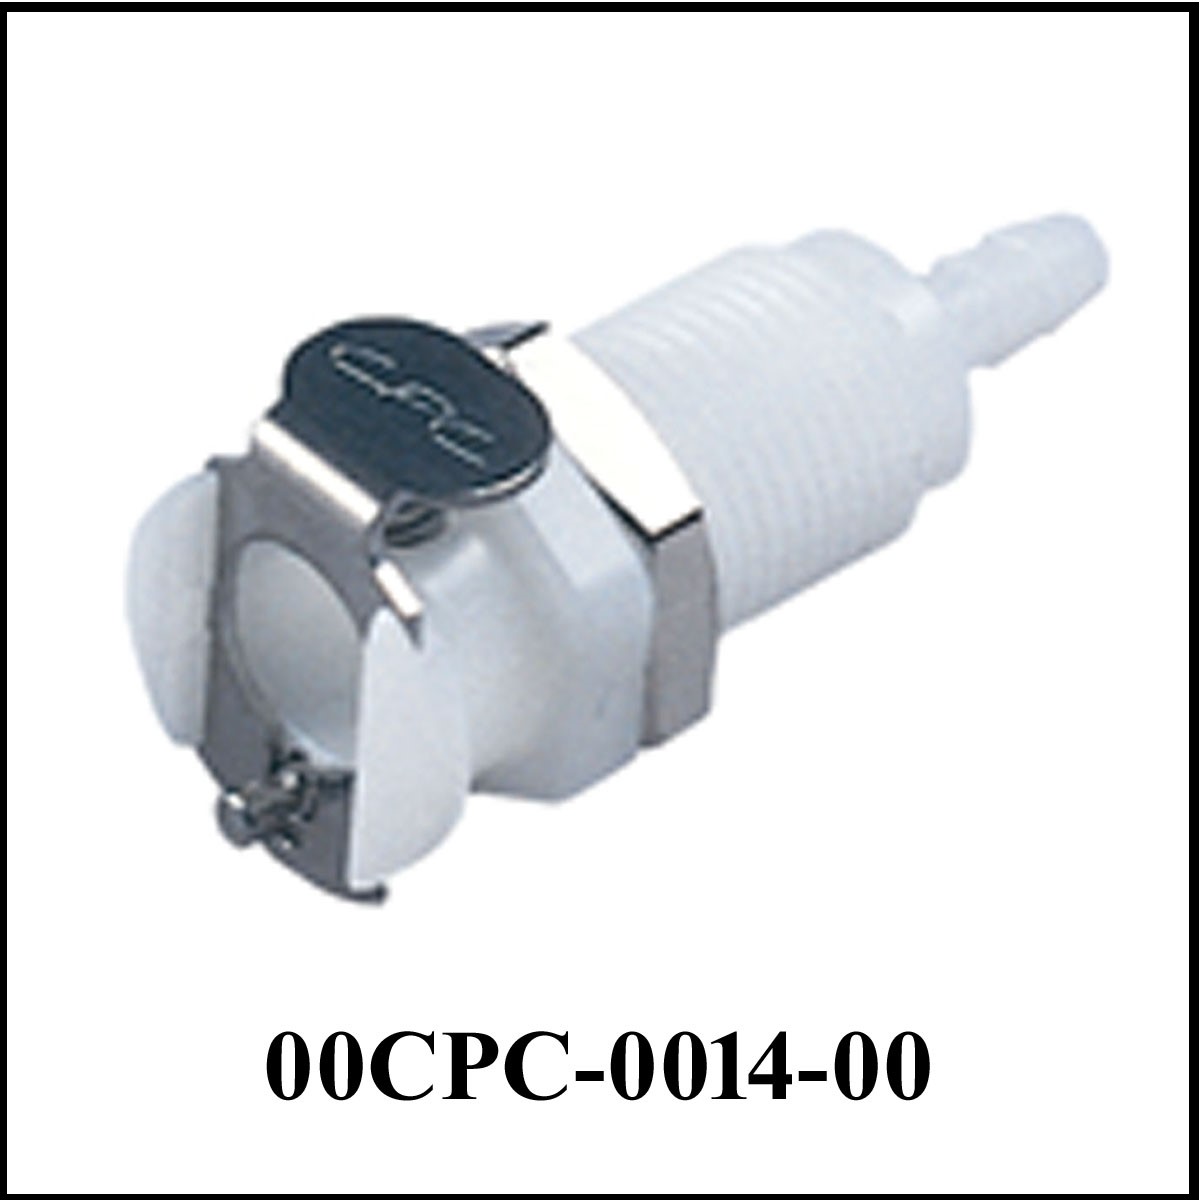 HFCD10812 High-Flow Quick-Disconnect Colder M 1/2” NPT Valved PP Body CPC